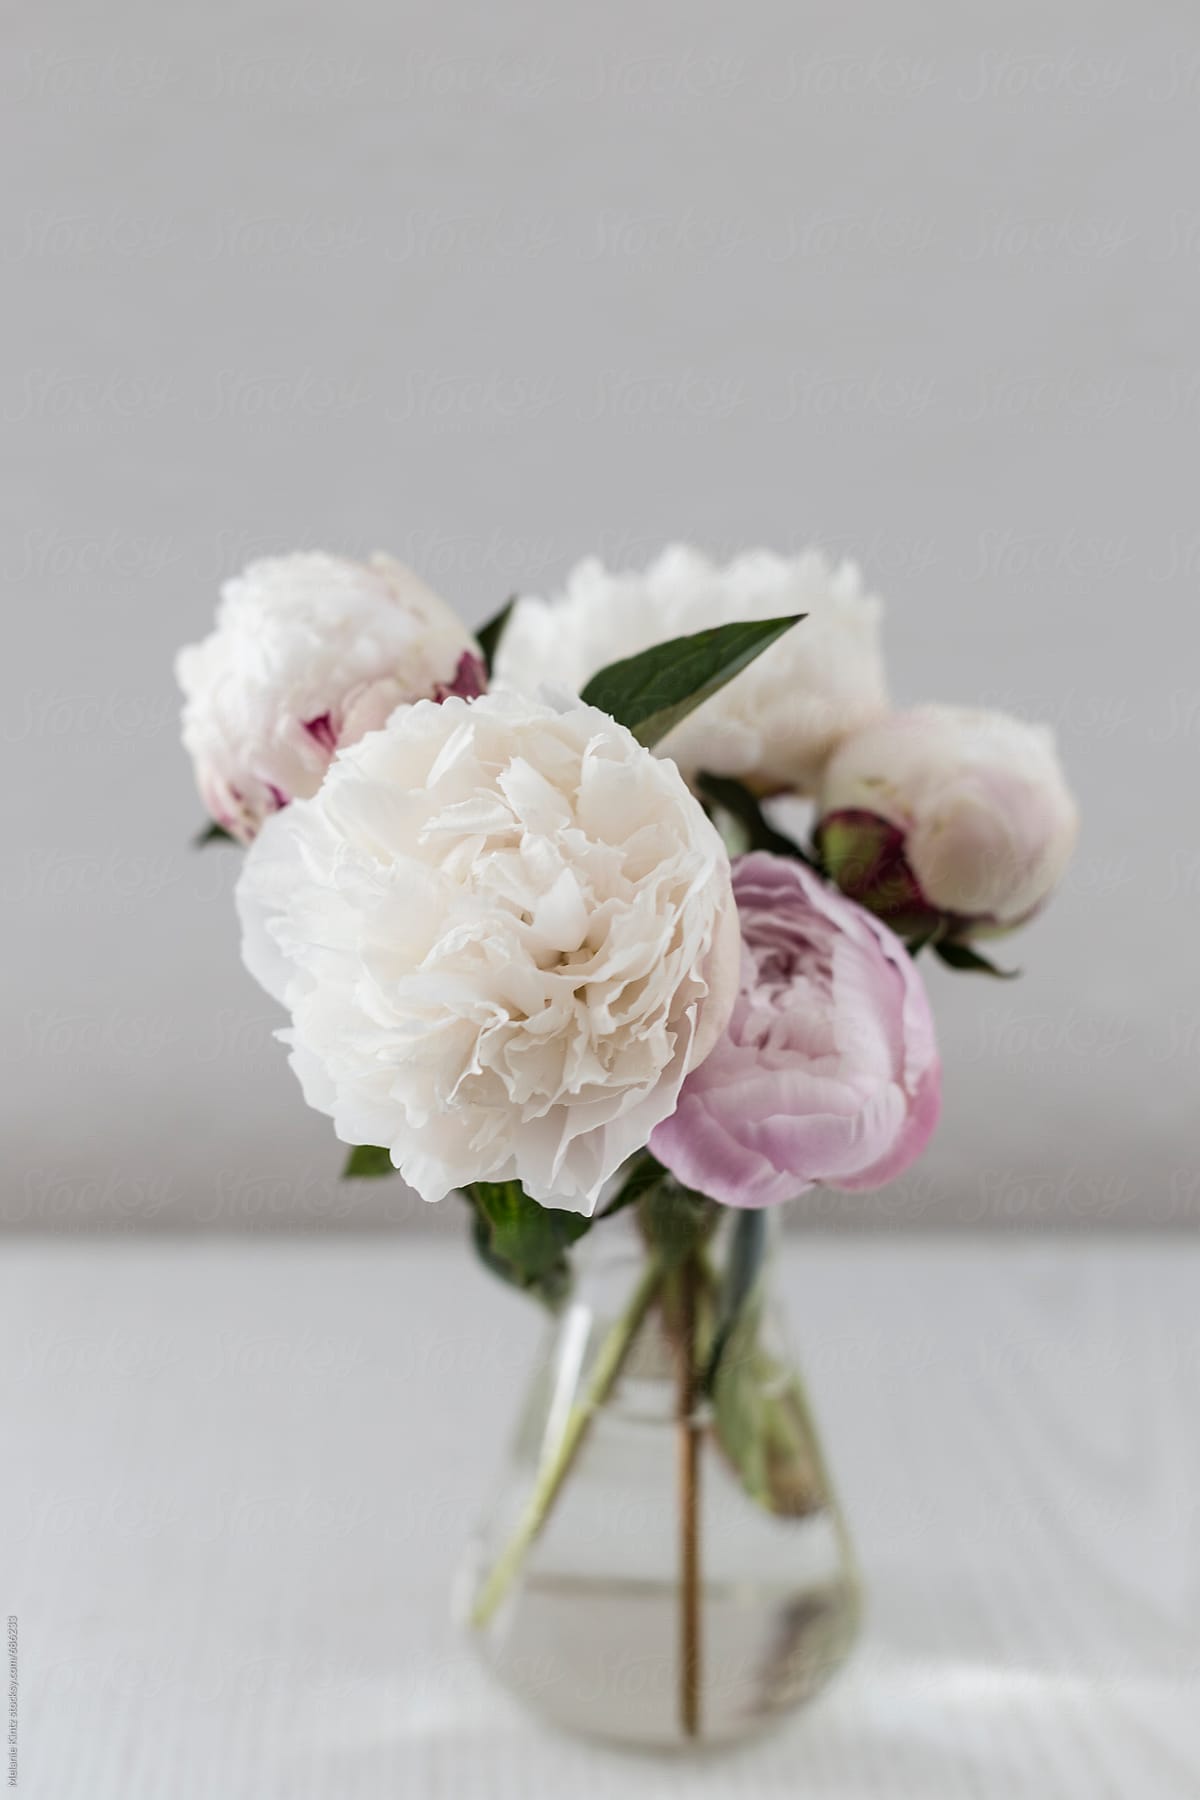 Small bouquet of peonies on top of a shelf